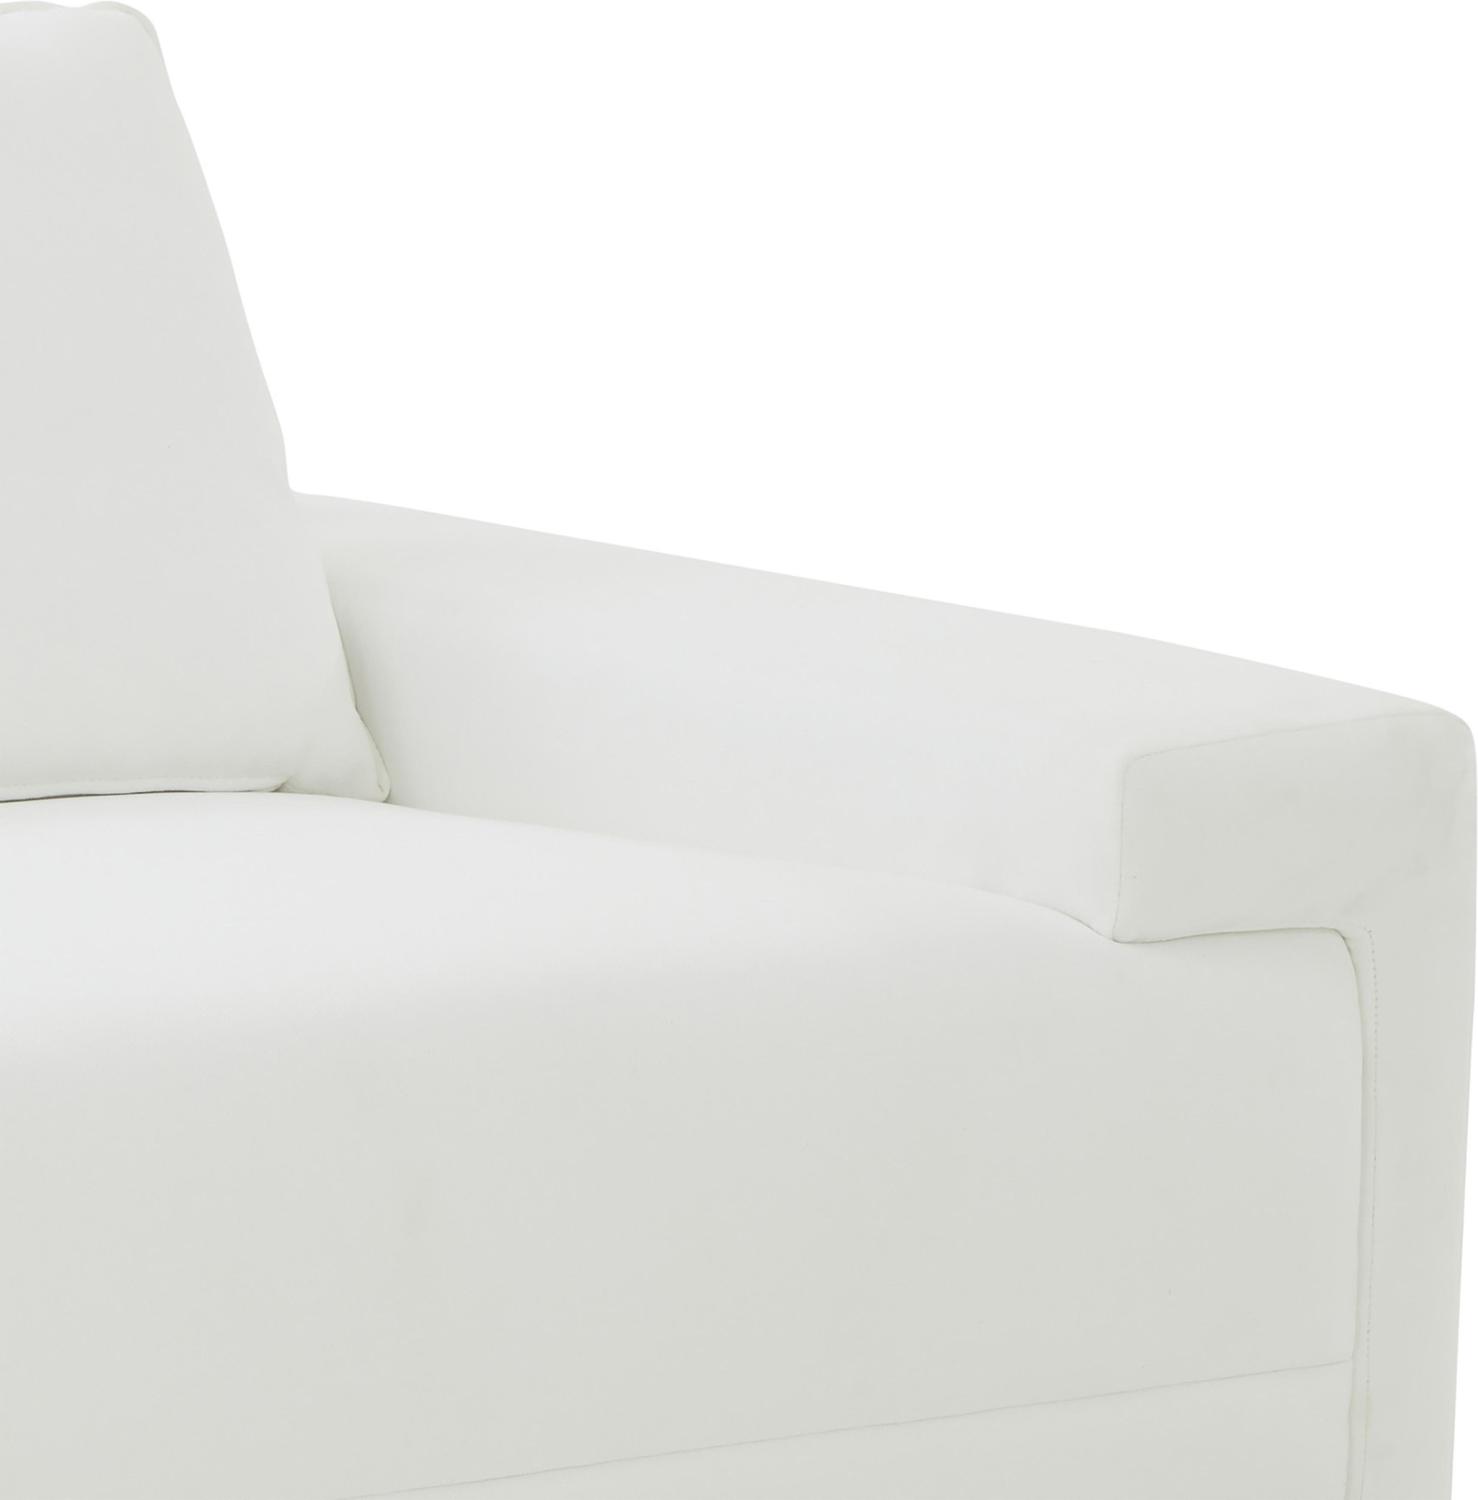 best modern lounge chair Tov Furniture Accent Chairs White